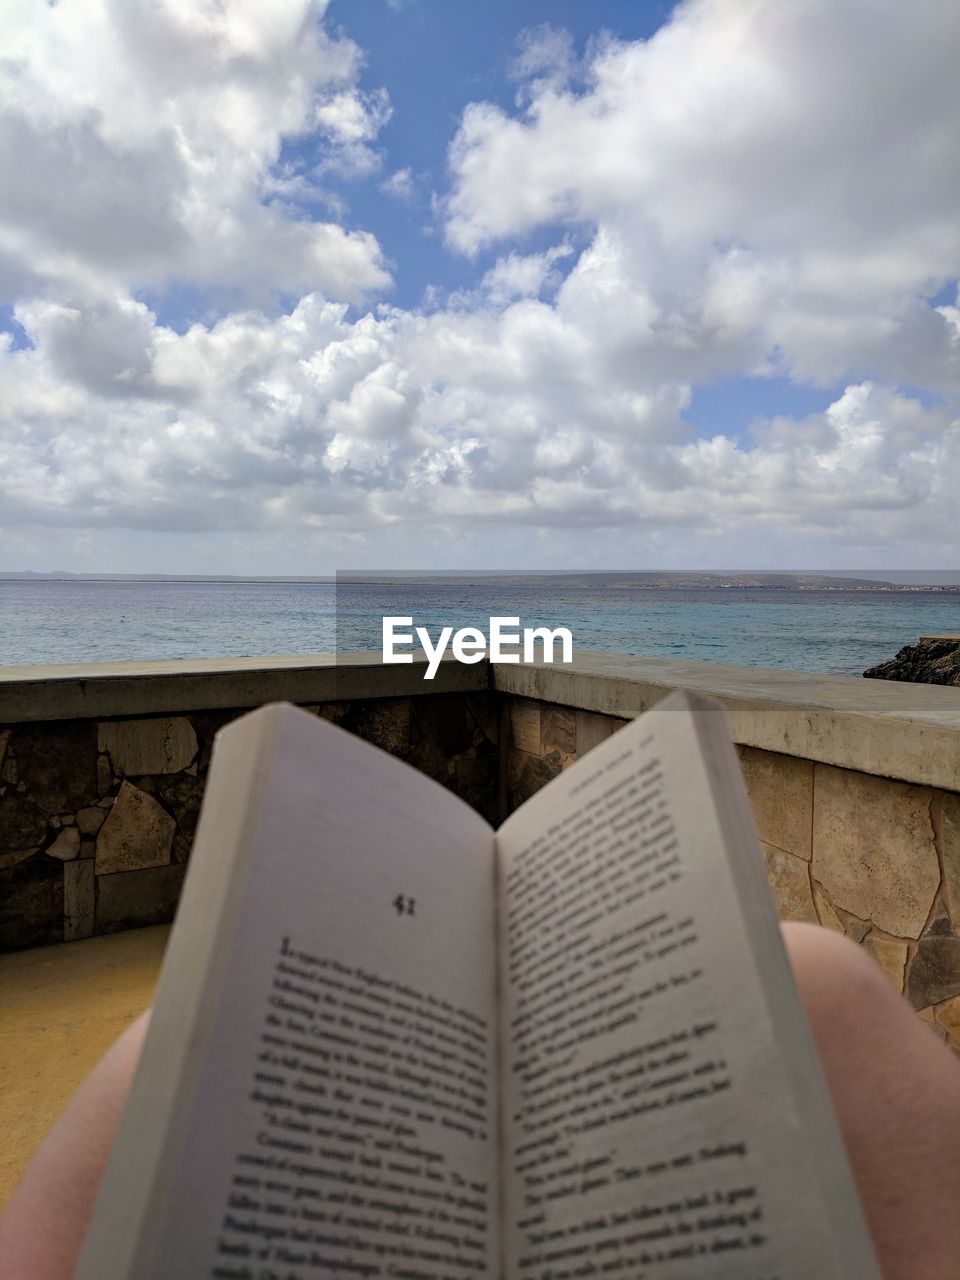 Midsection of person with book by sea against cloudy sky